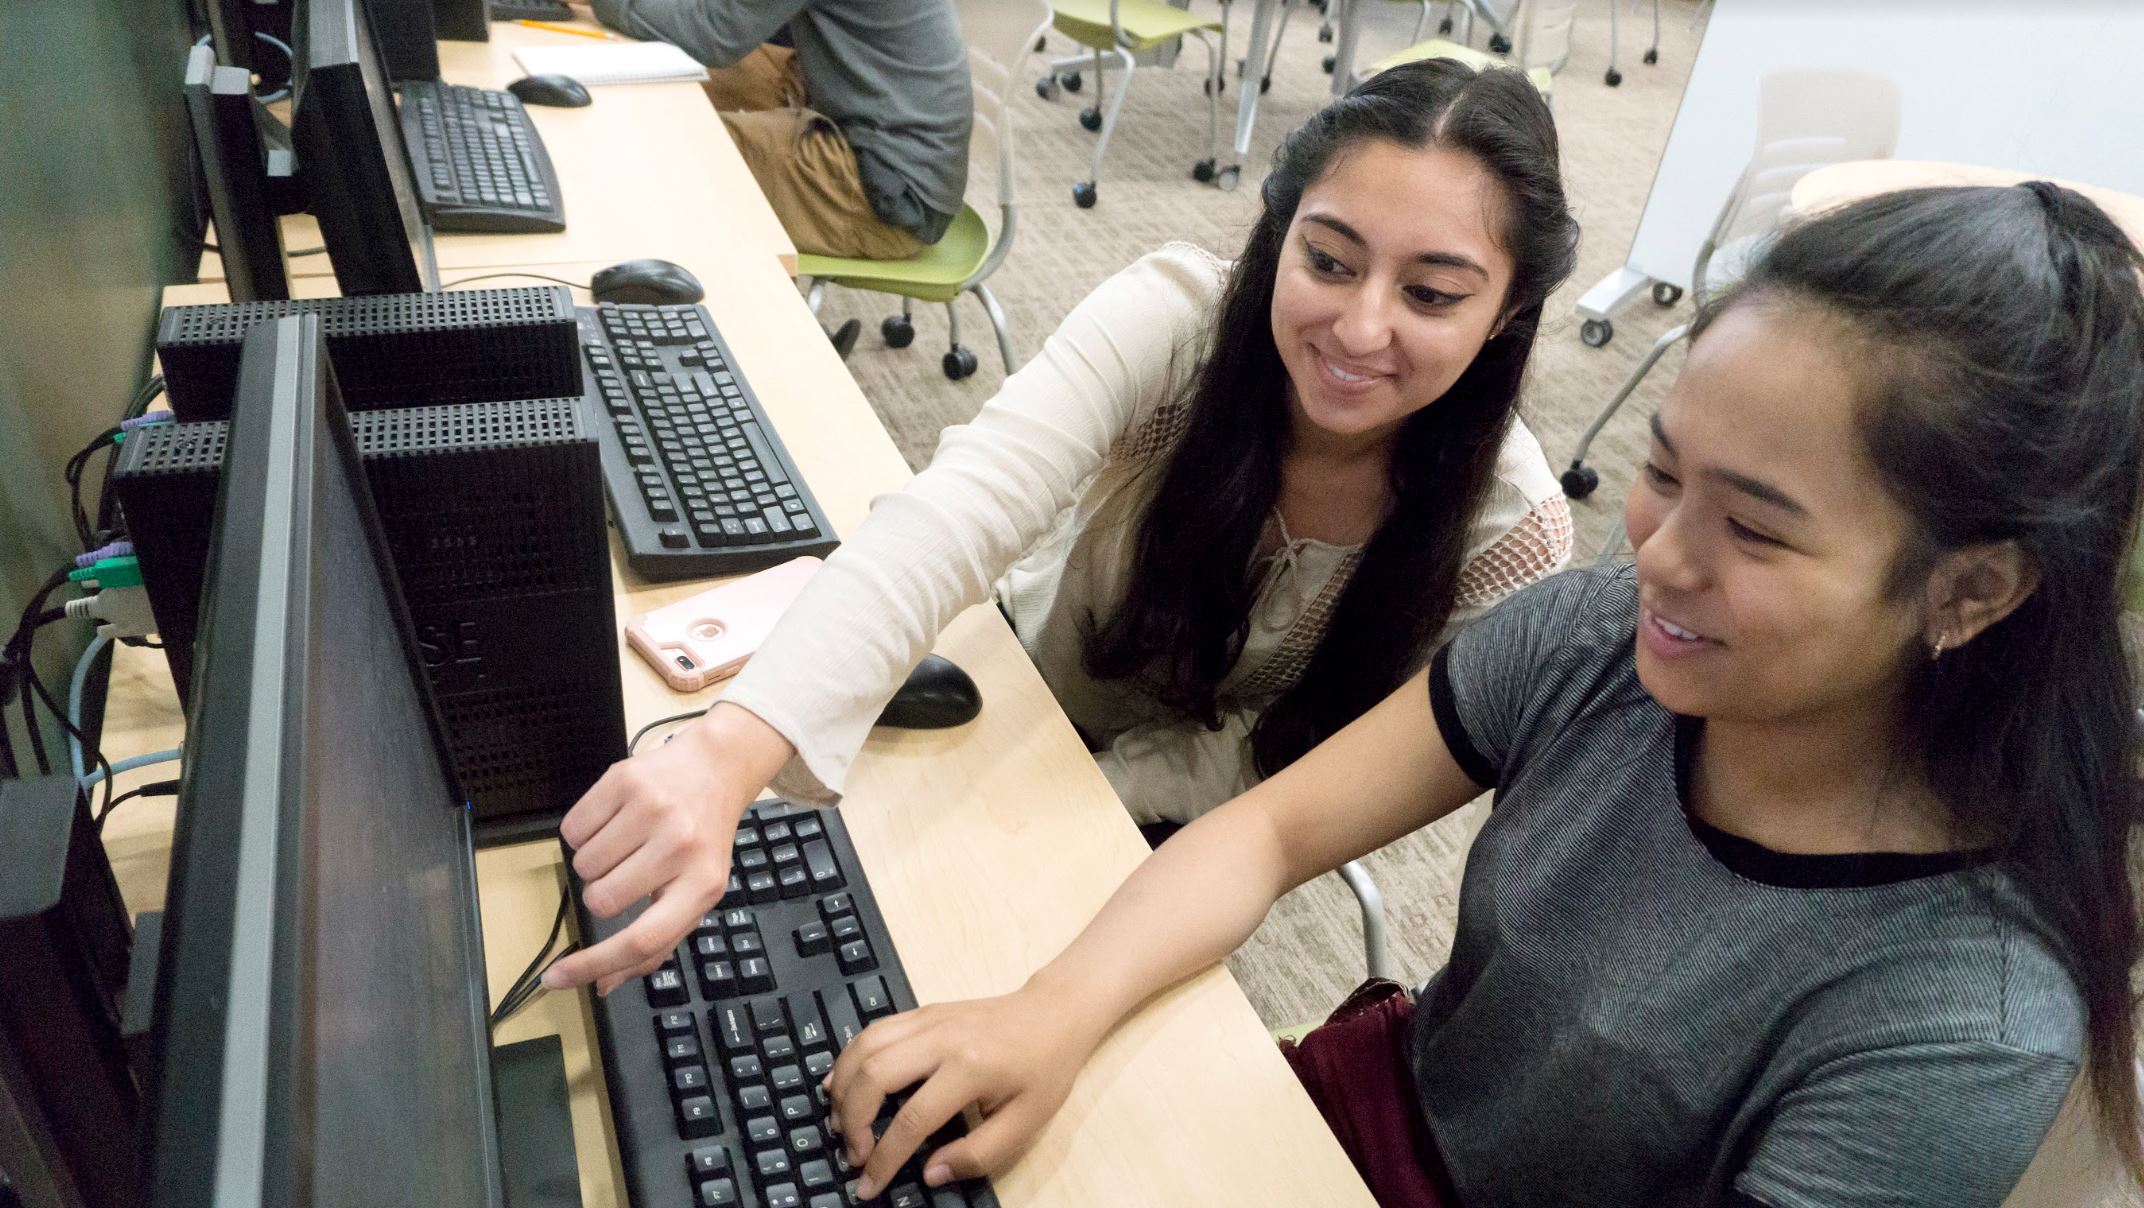 Two students working at a computer